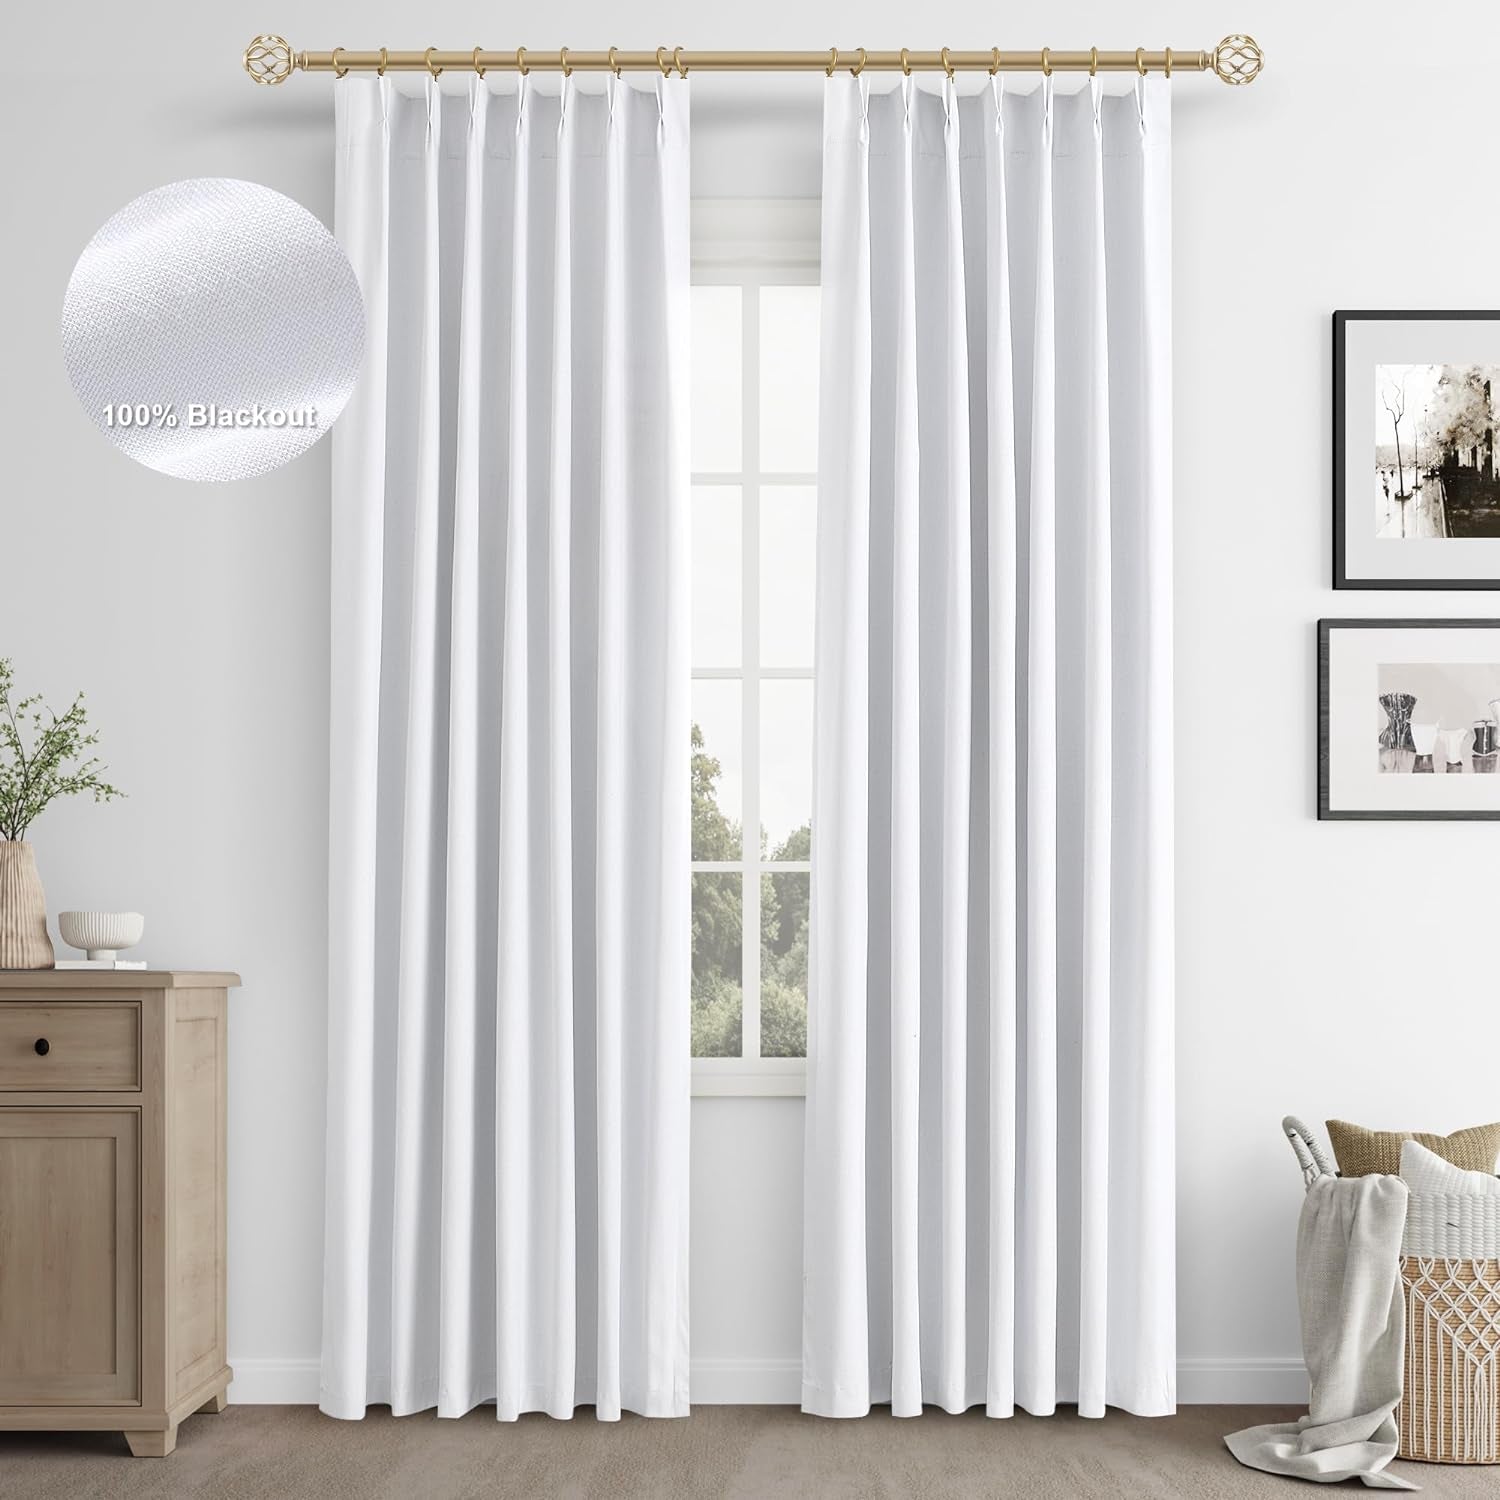 Joywell Cream Ivory Linen 100% Blackout Curtains 84 Inches Long,Pinch Pleated Back Tab Drapes with Hooks Light Blocking Thermal Insulated for Bedroom Living Room,W40 X L84,Natural Beige,2 Panels  Joywell Pure White 40W X 96L Inch X 2 Panels 